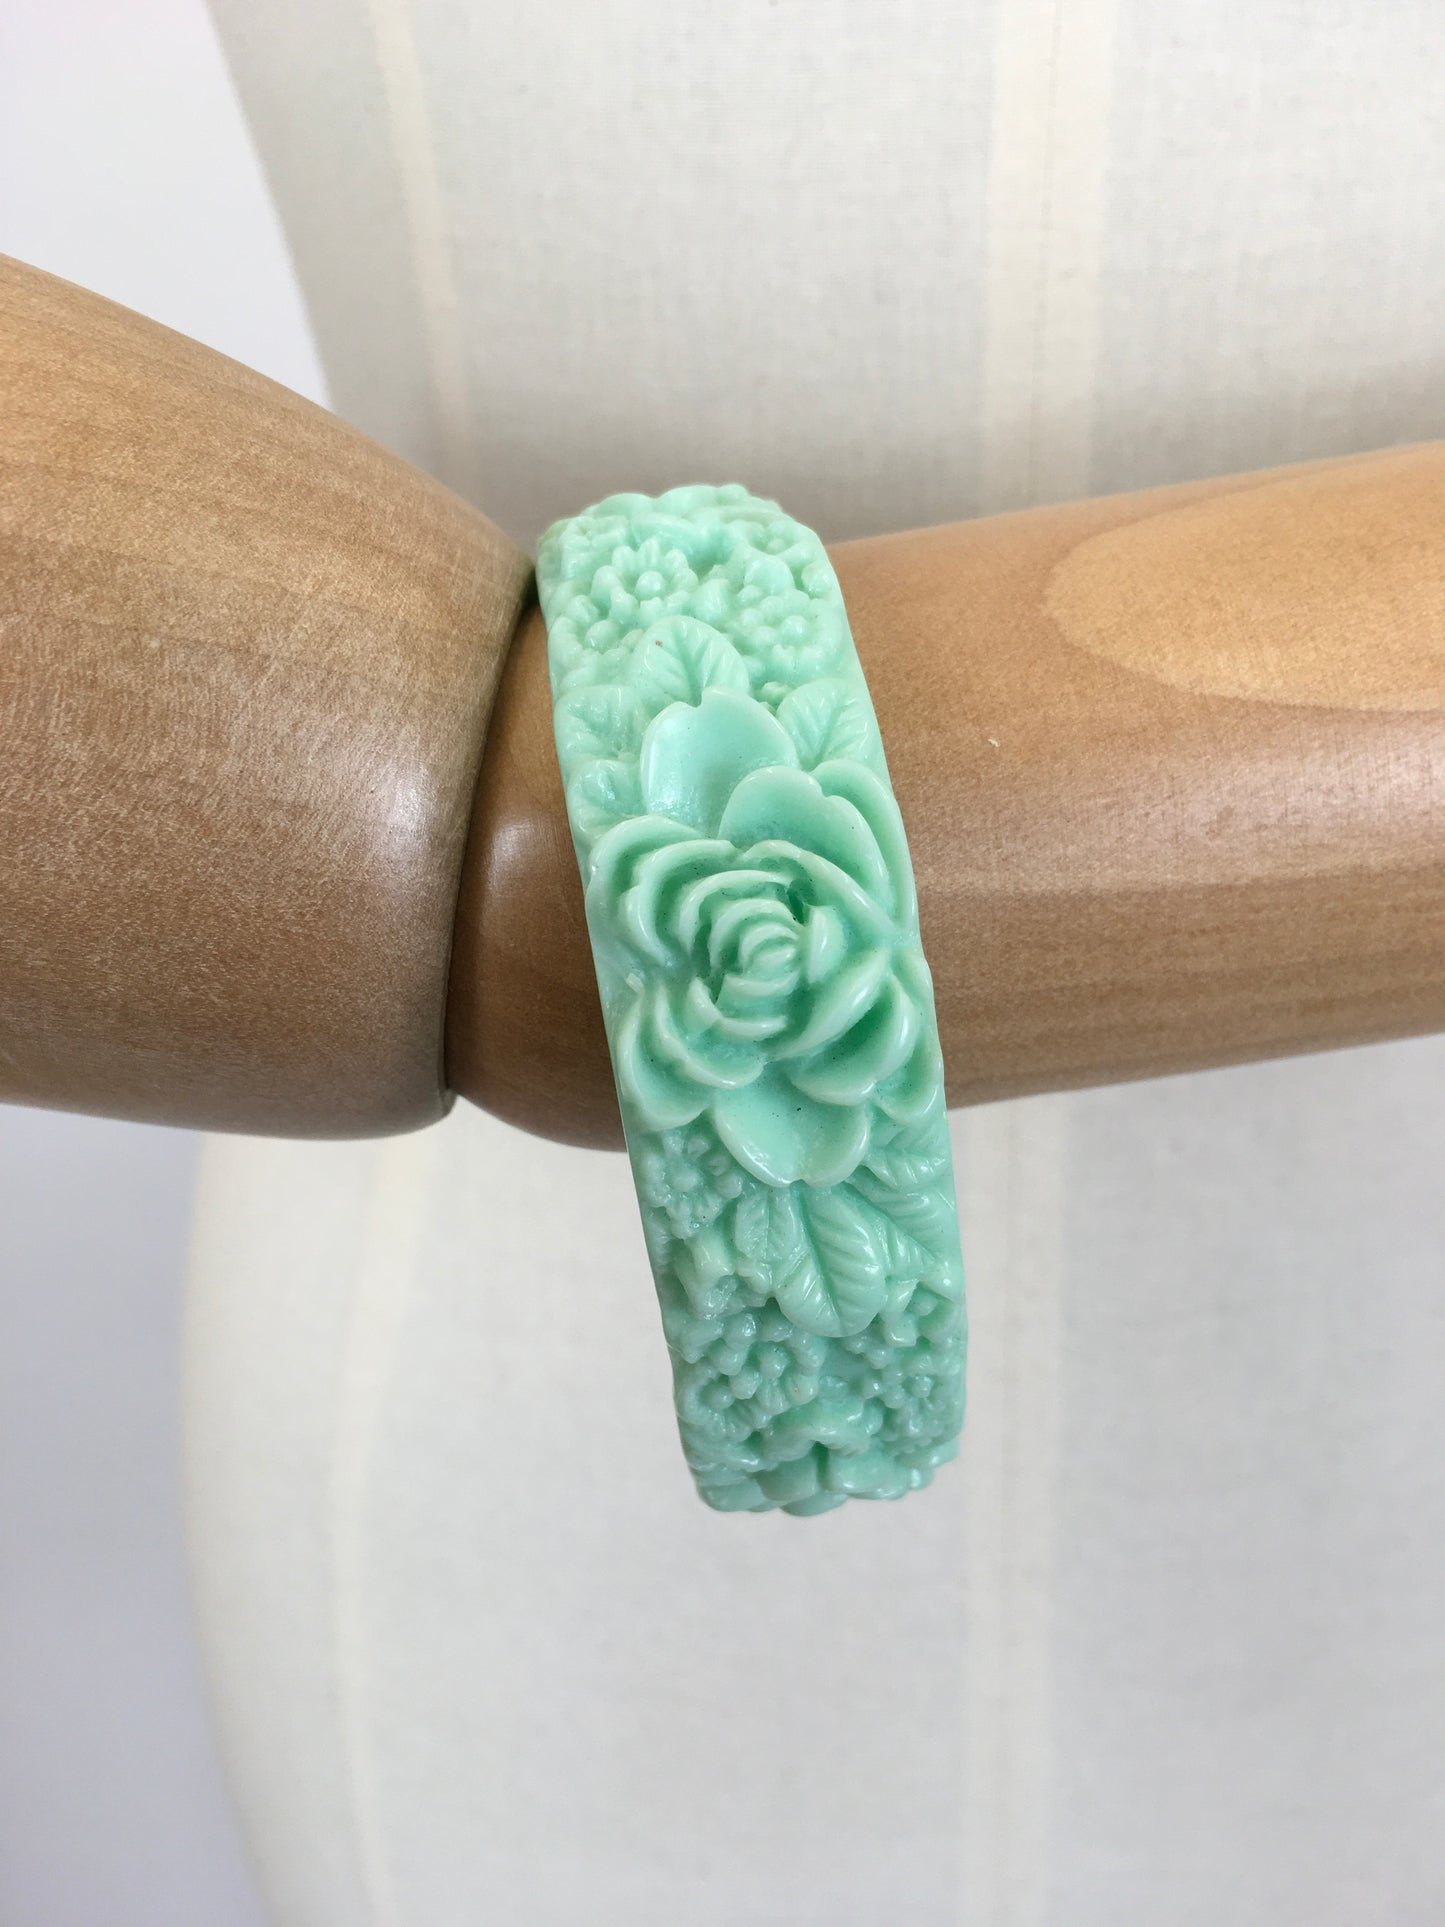 Original 1950’s FABULOUS Pastel Green Plastic Bangle - With Carved Floral Detailing